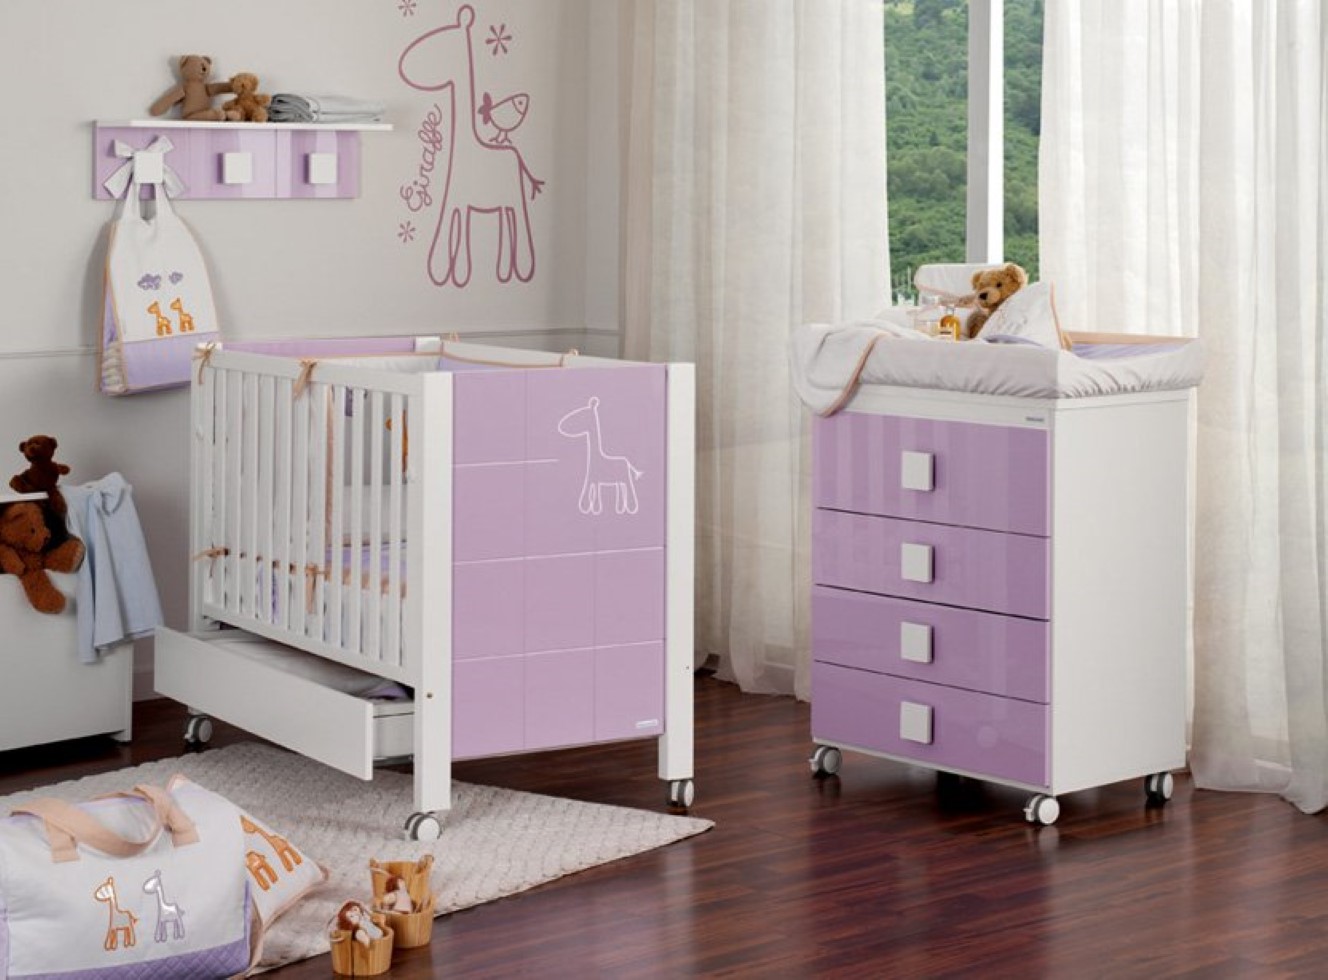 Purple White Changing Portable Purple White Crib And Changing Pad Furniture In Sweet Modern Baby Nursery With Laminate Floor Kids Room Various Baby Nursery Furniture For Wonderful Baby Room